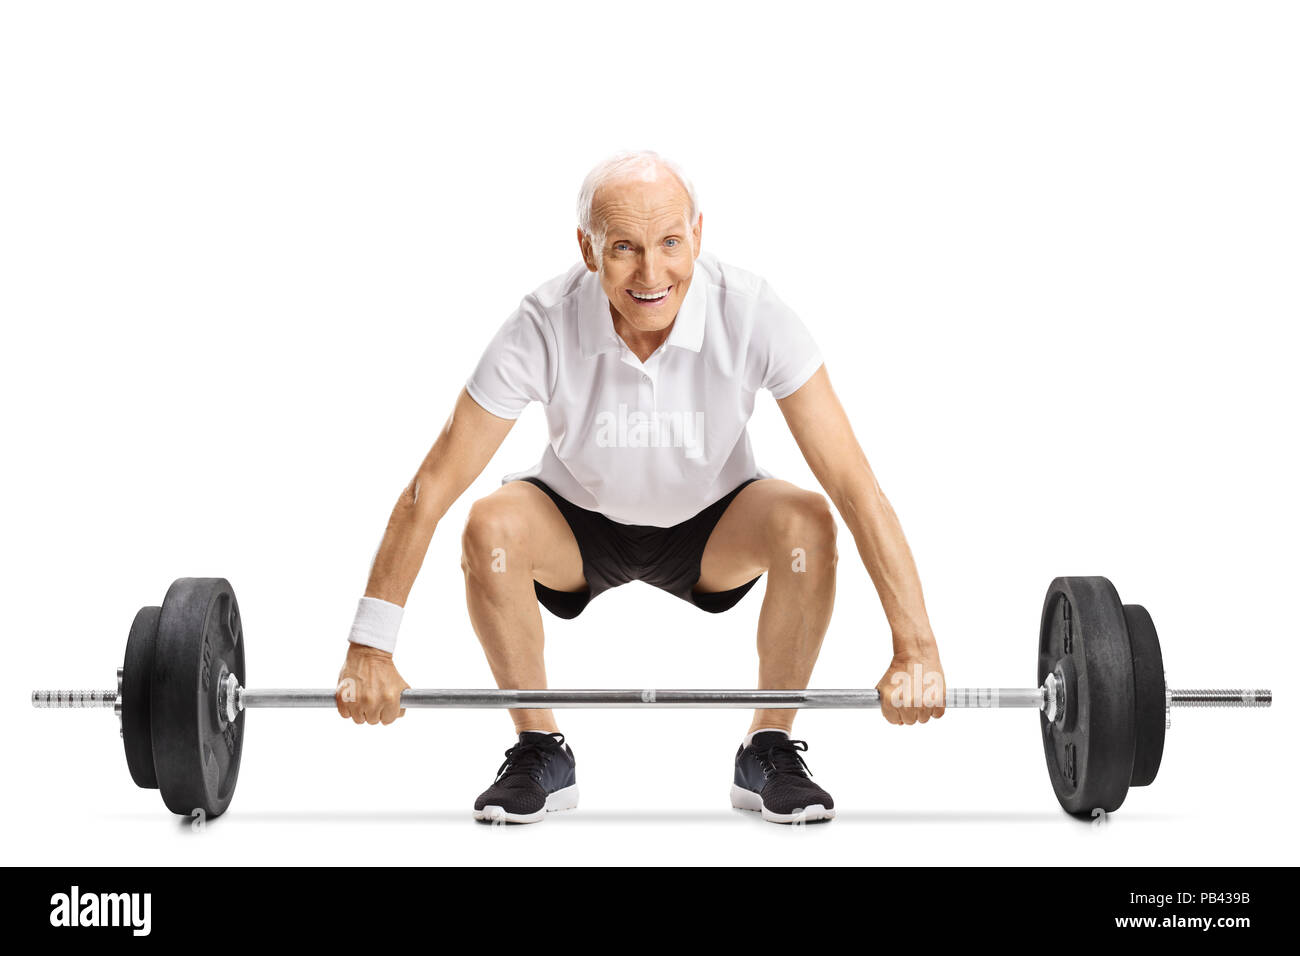 Senior lifting a barbell isolated on white background Stock Photo